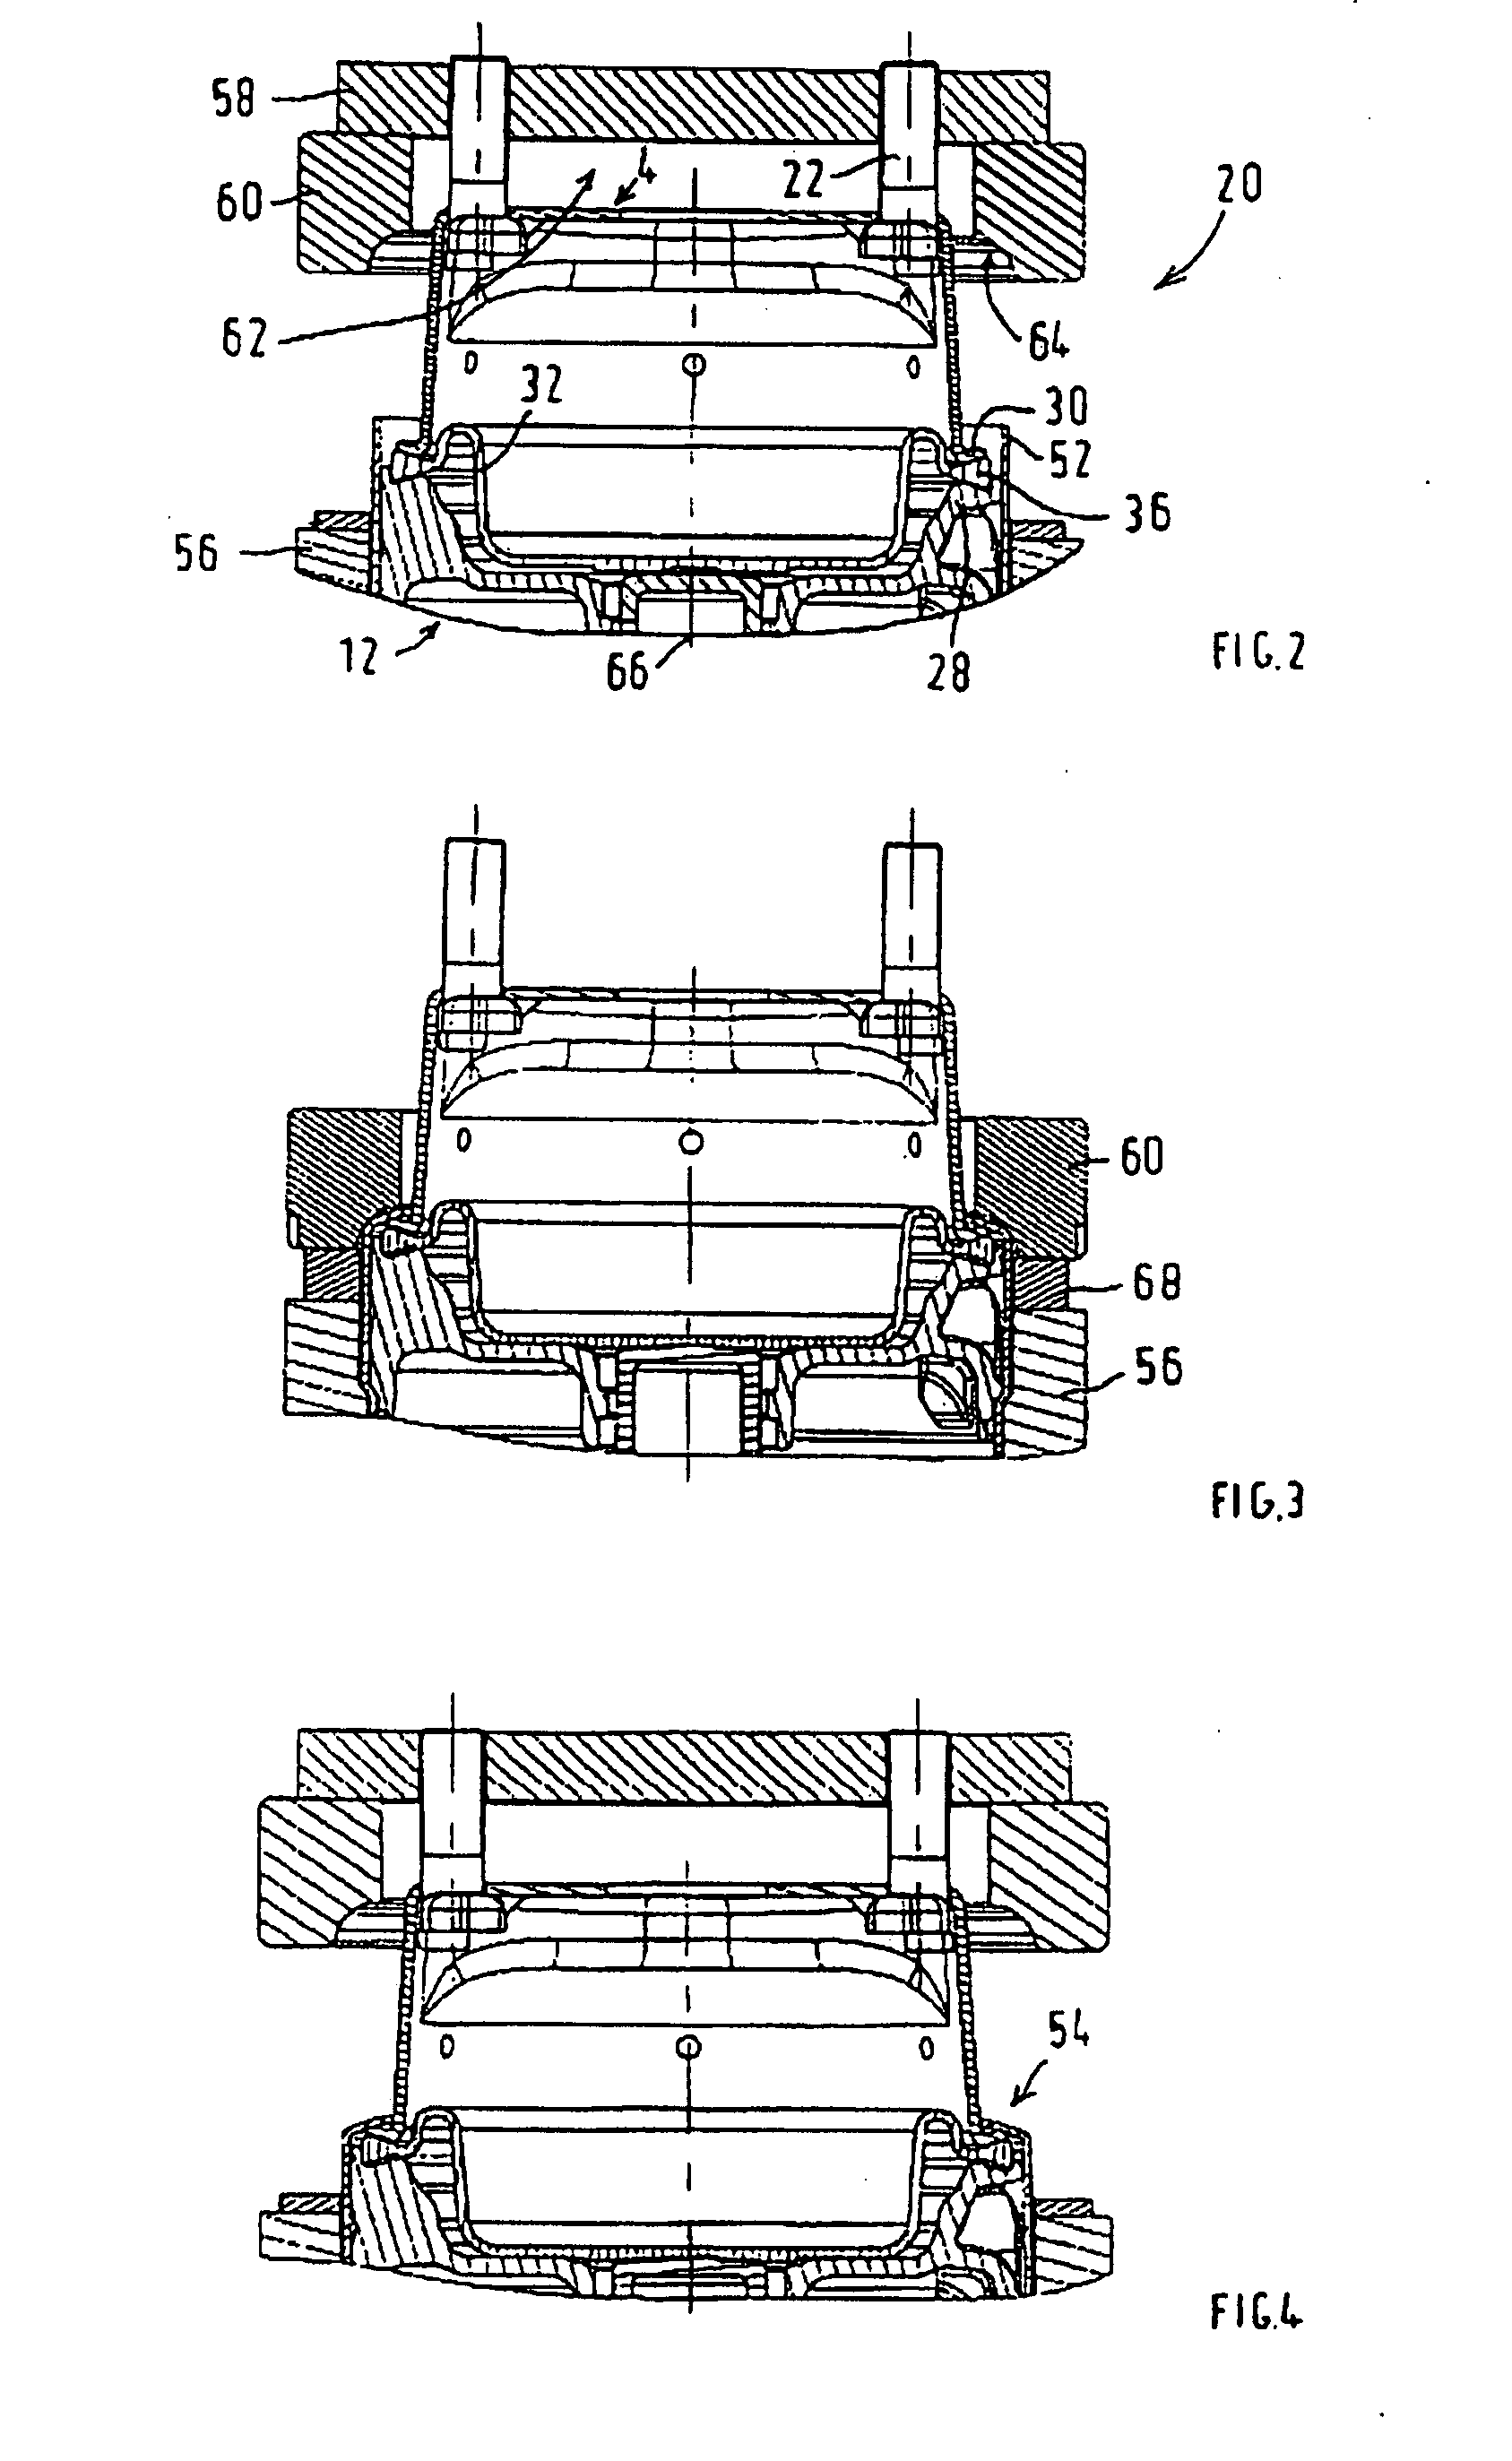 Method for manufacturing steel housings, composed of at least two housing components, for assemblies installed in vehicles